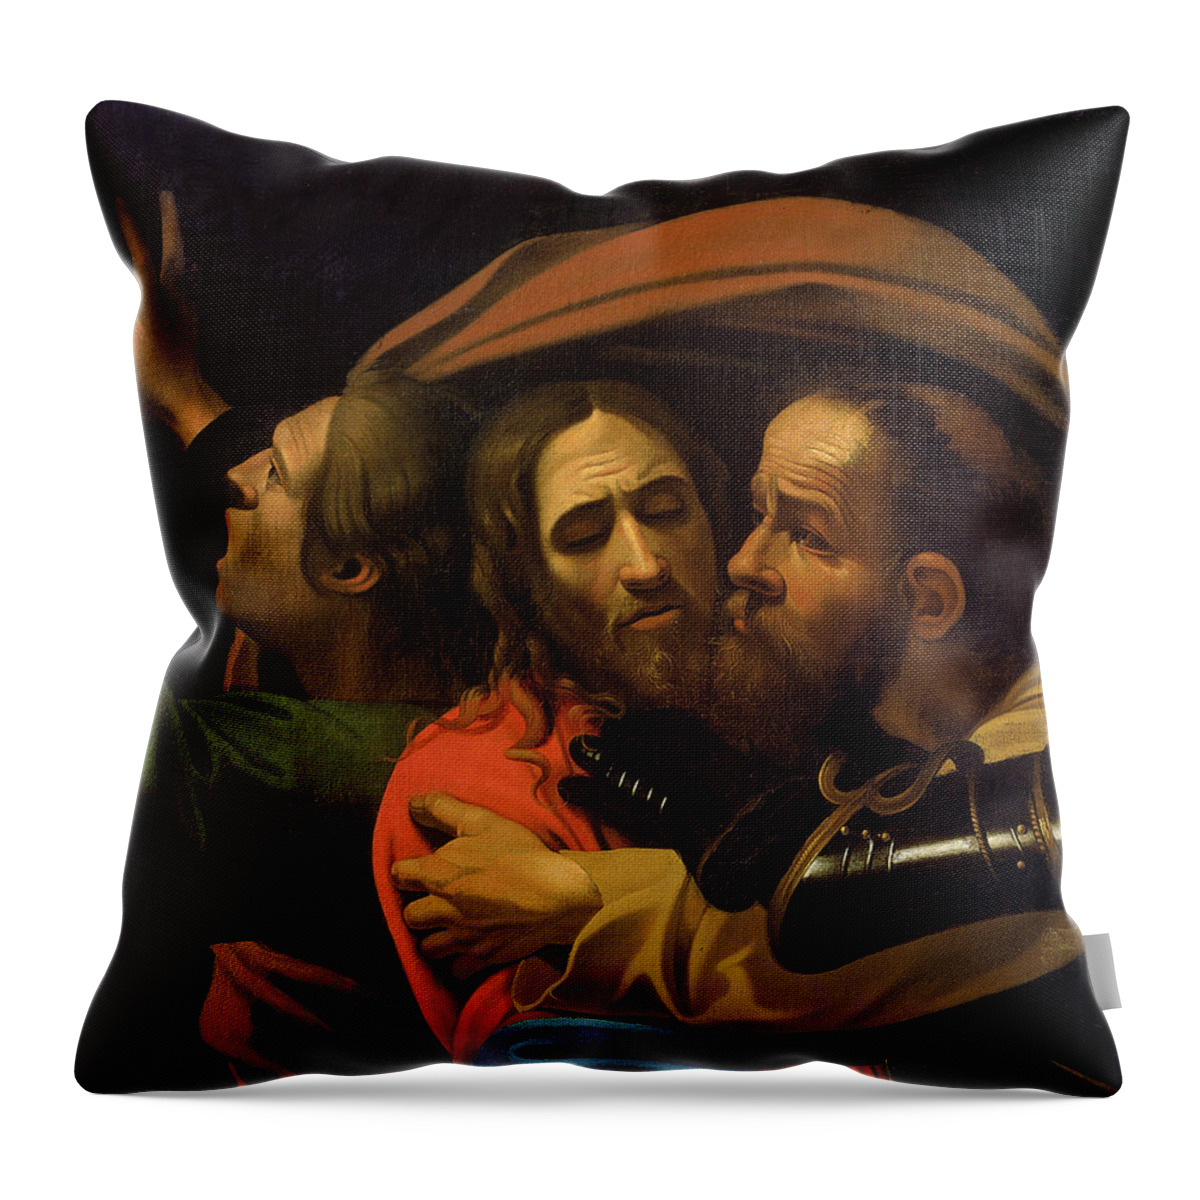 Jesus Throw Pillow featuring the painting The Taking Of Christ by Michelangelo Caravaggio